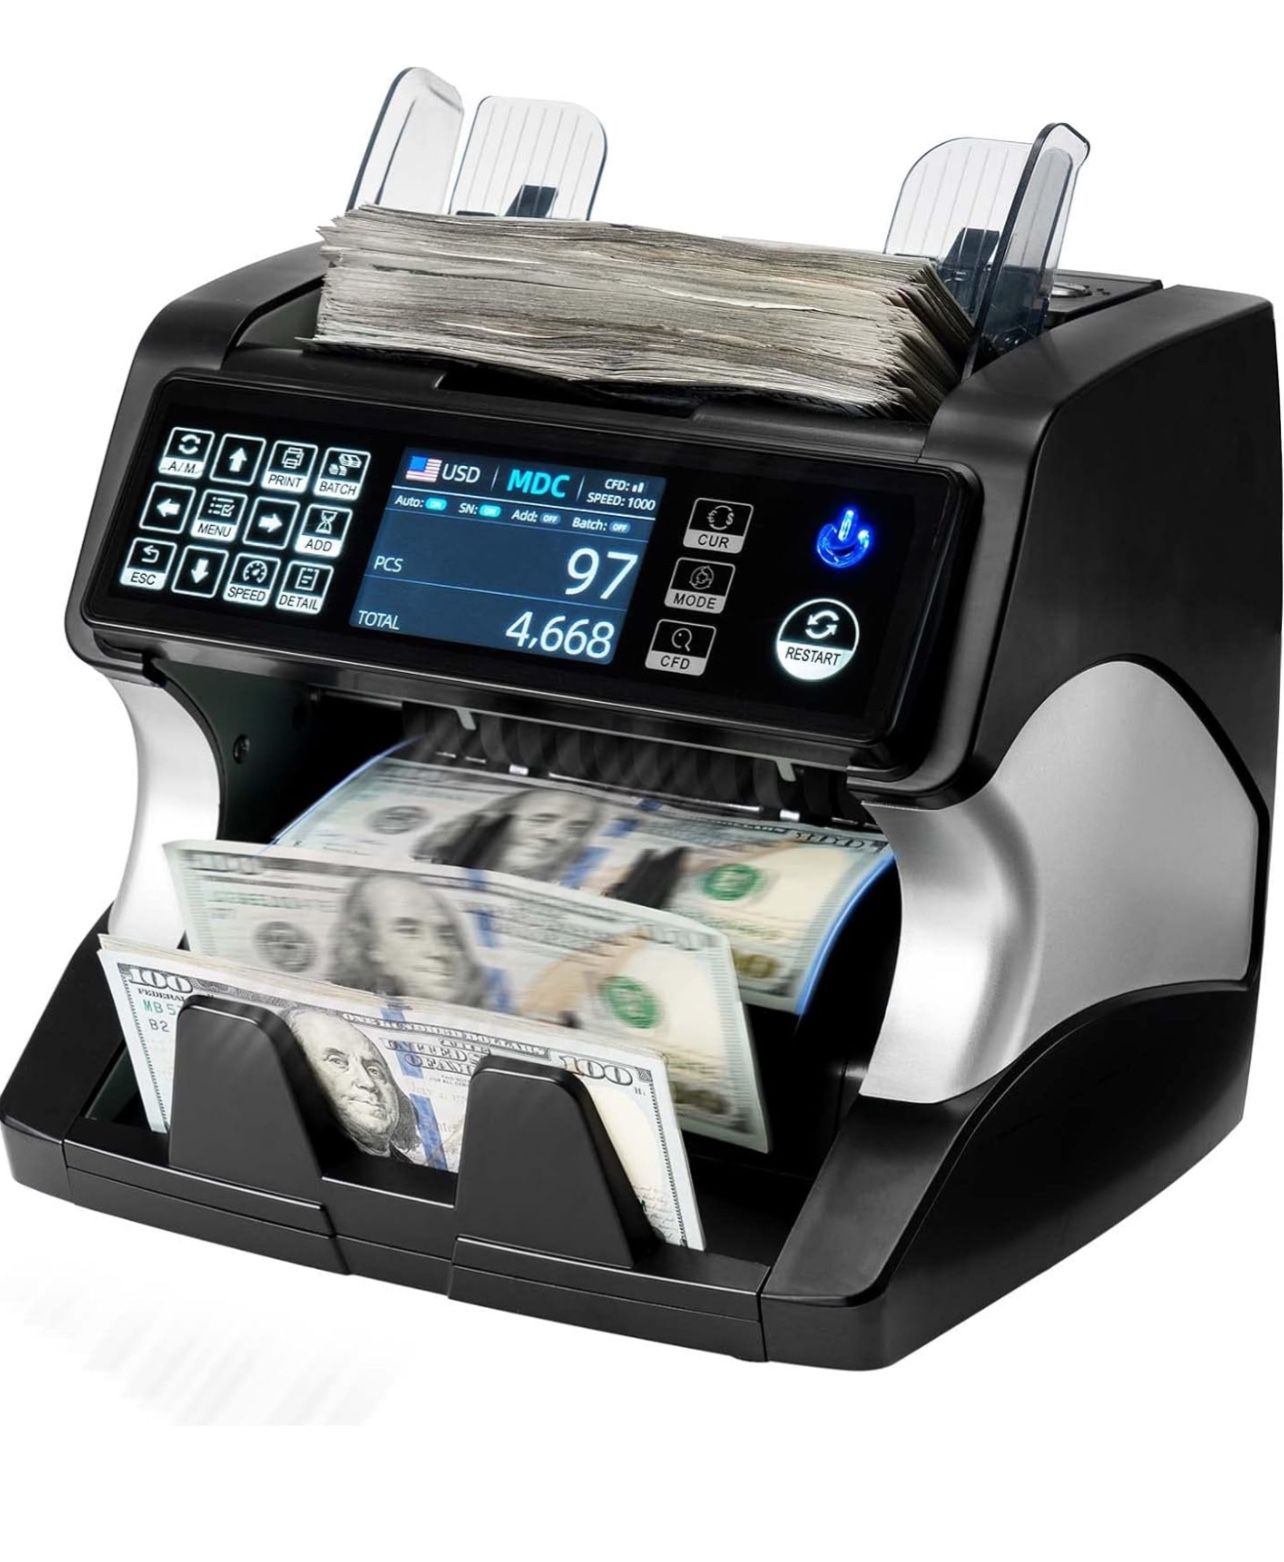 Brand New In The Box- MUNBYN IMC01 Black Money Counter Machine Mixed Denomination, Serial Number, MUL Currency, Printer Compatible, CIS/UV/IR/MG/MT Co